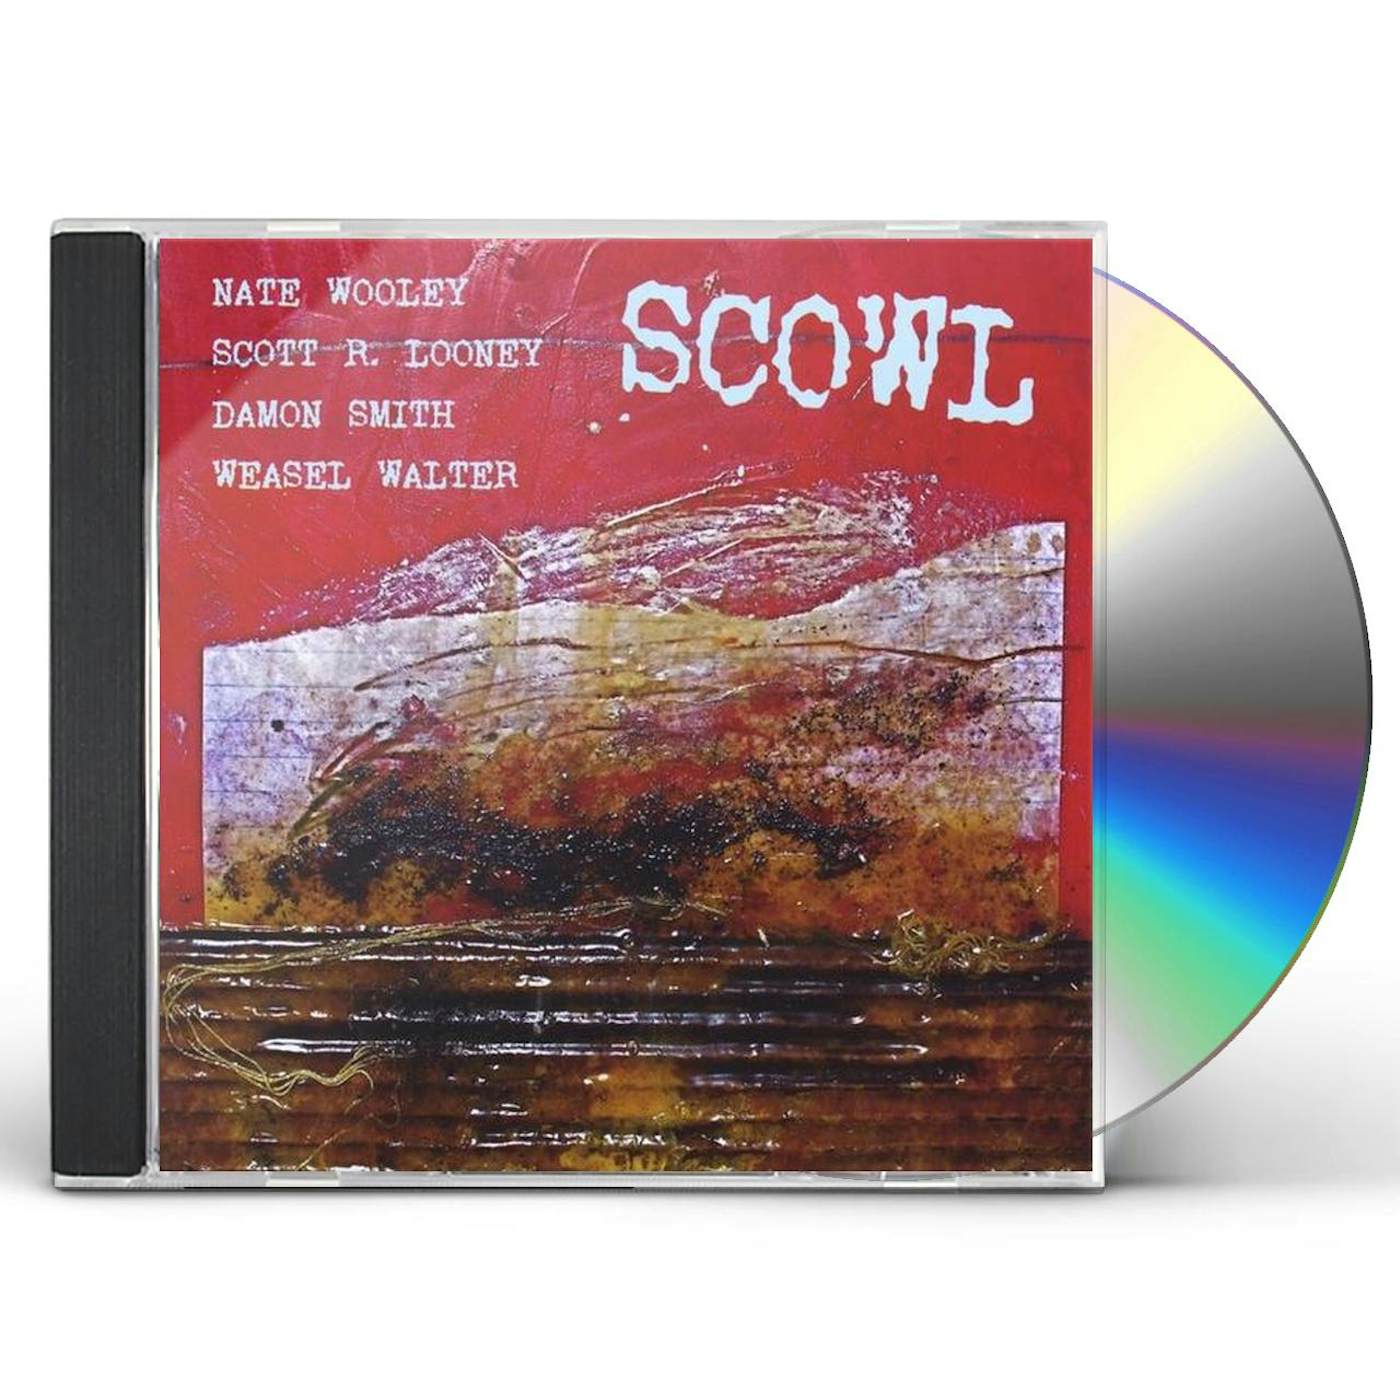 Nate Wooley 98332 SCOWL CD